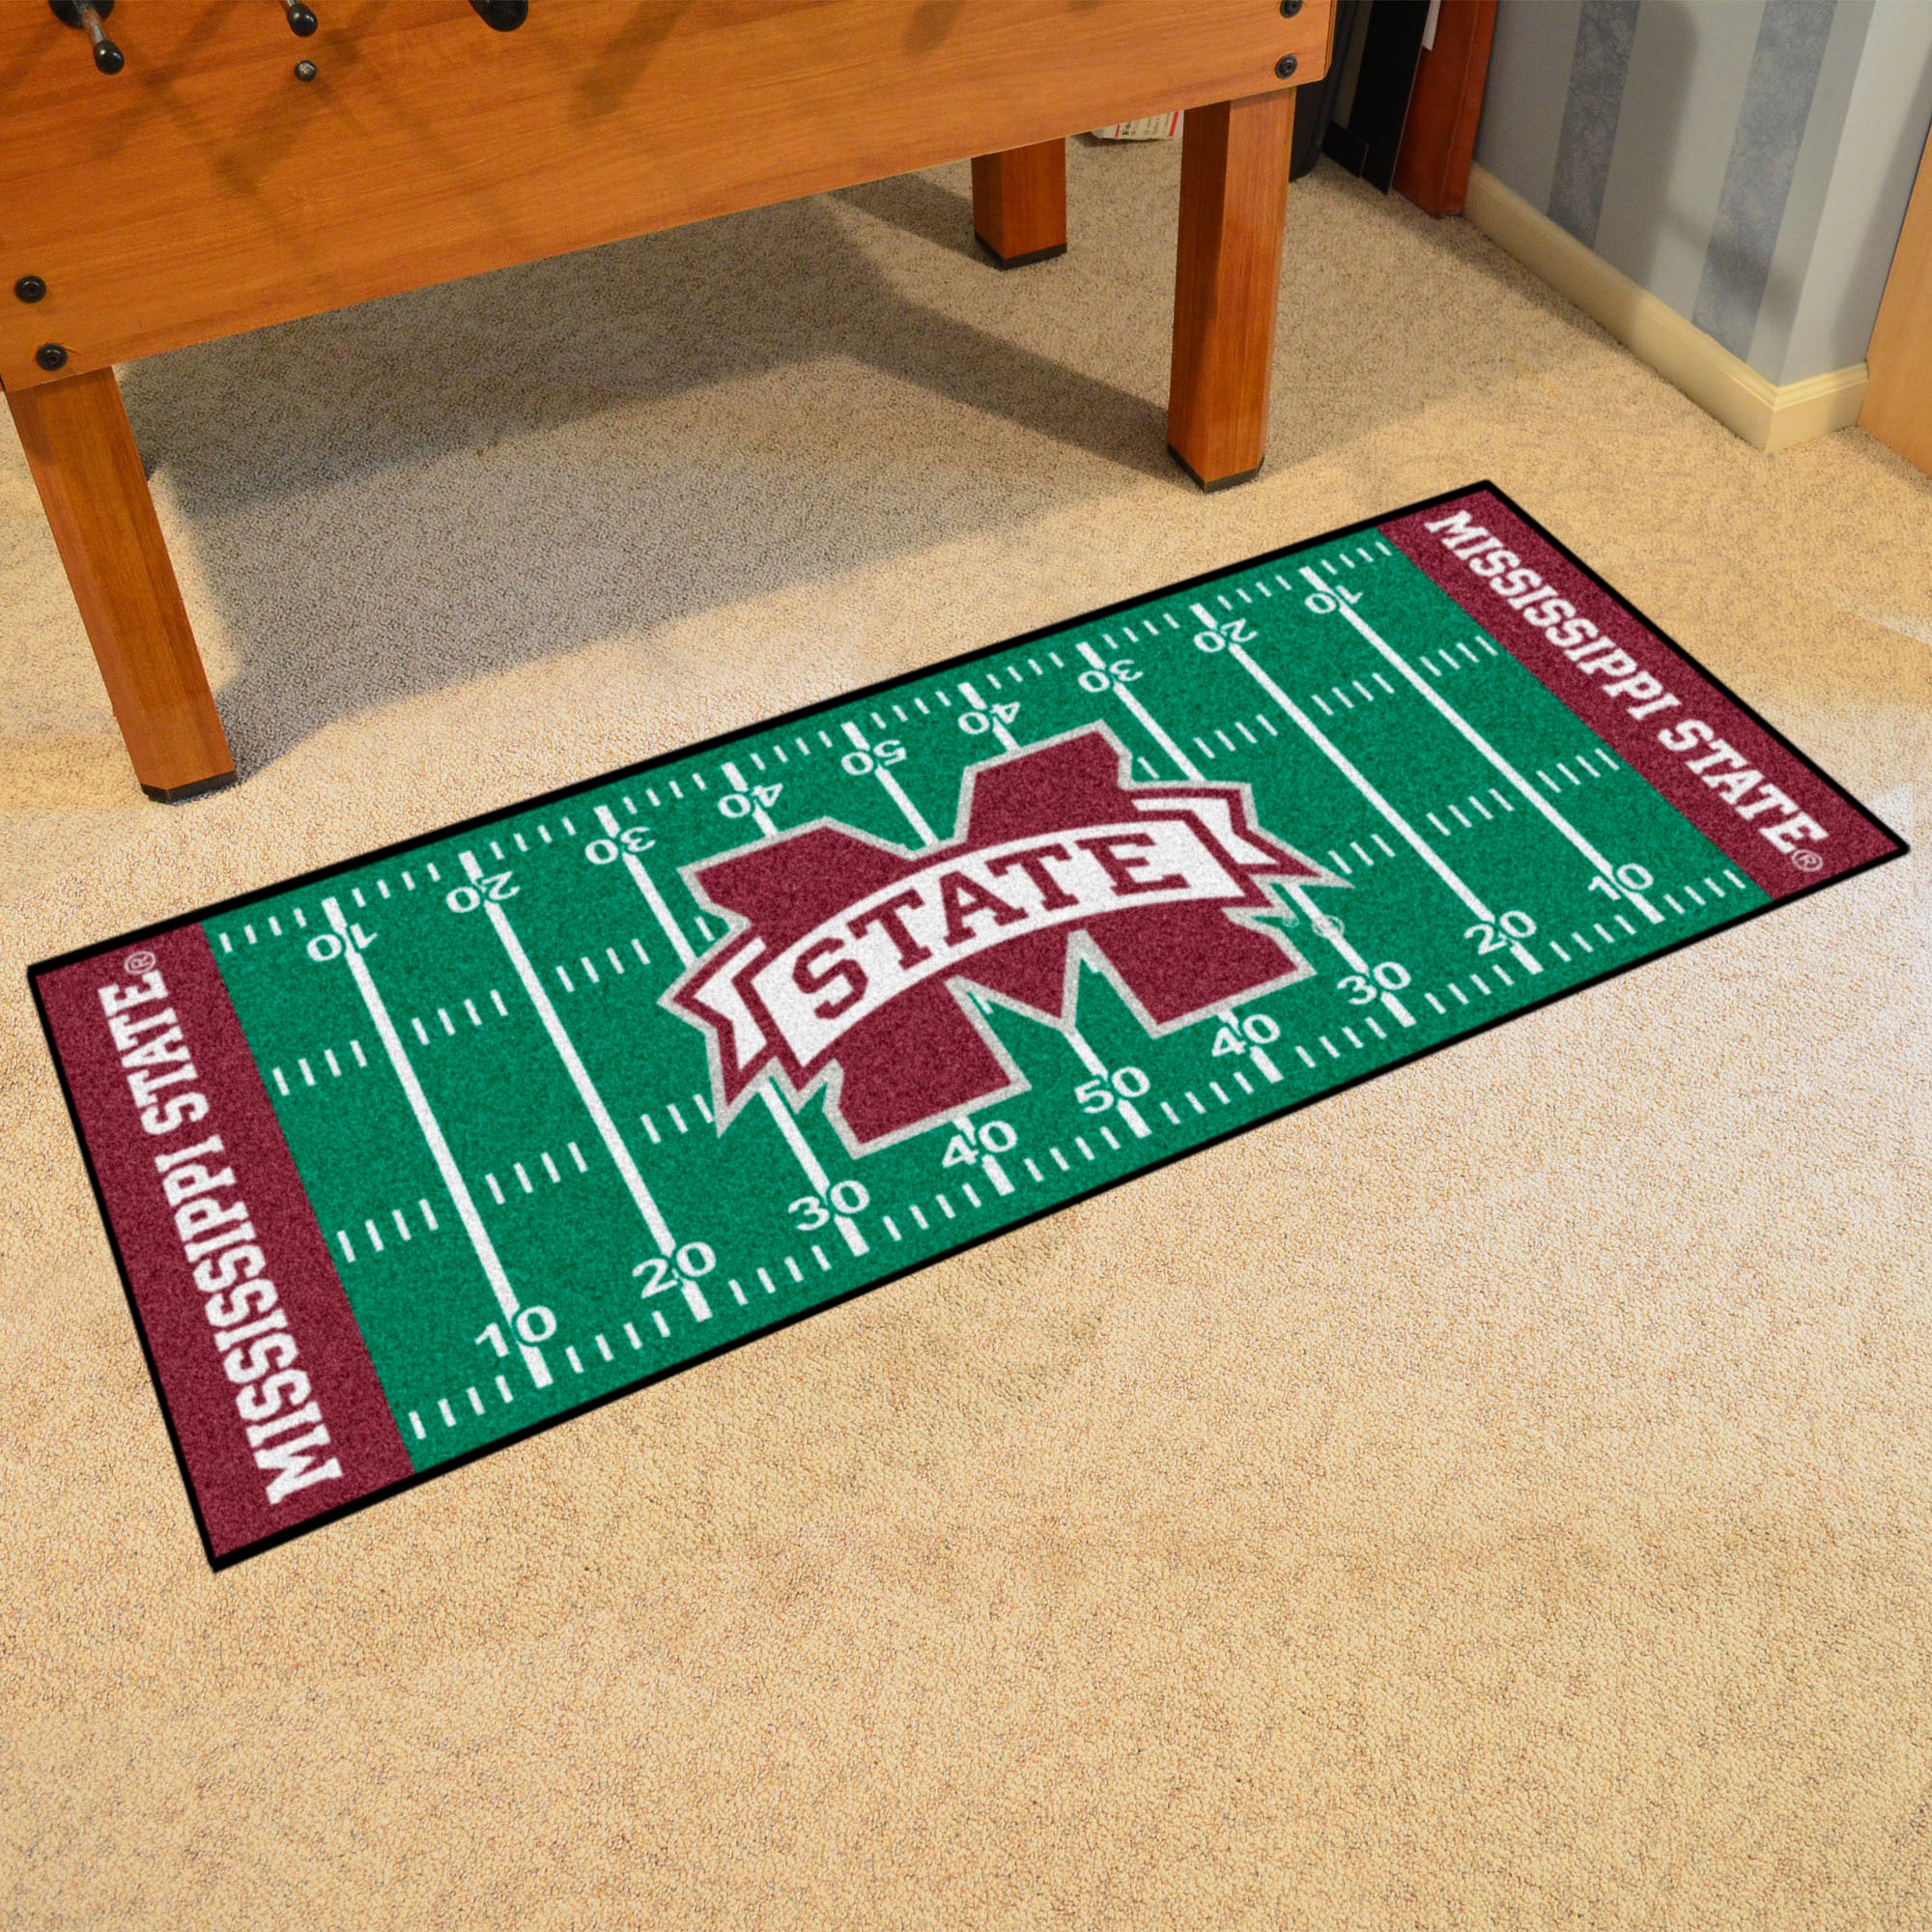 FANMATS, Mississippi State University Field Runner Mat - 30in. x 72in.